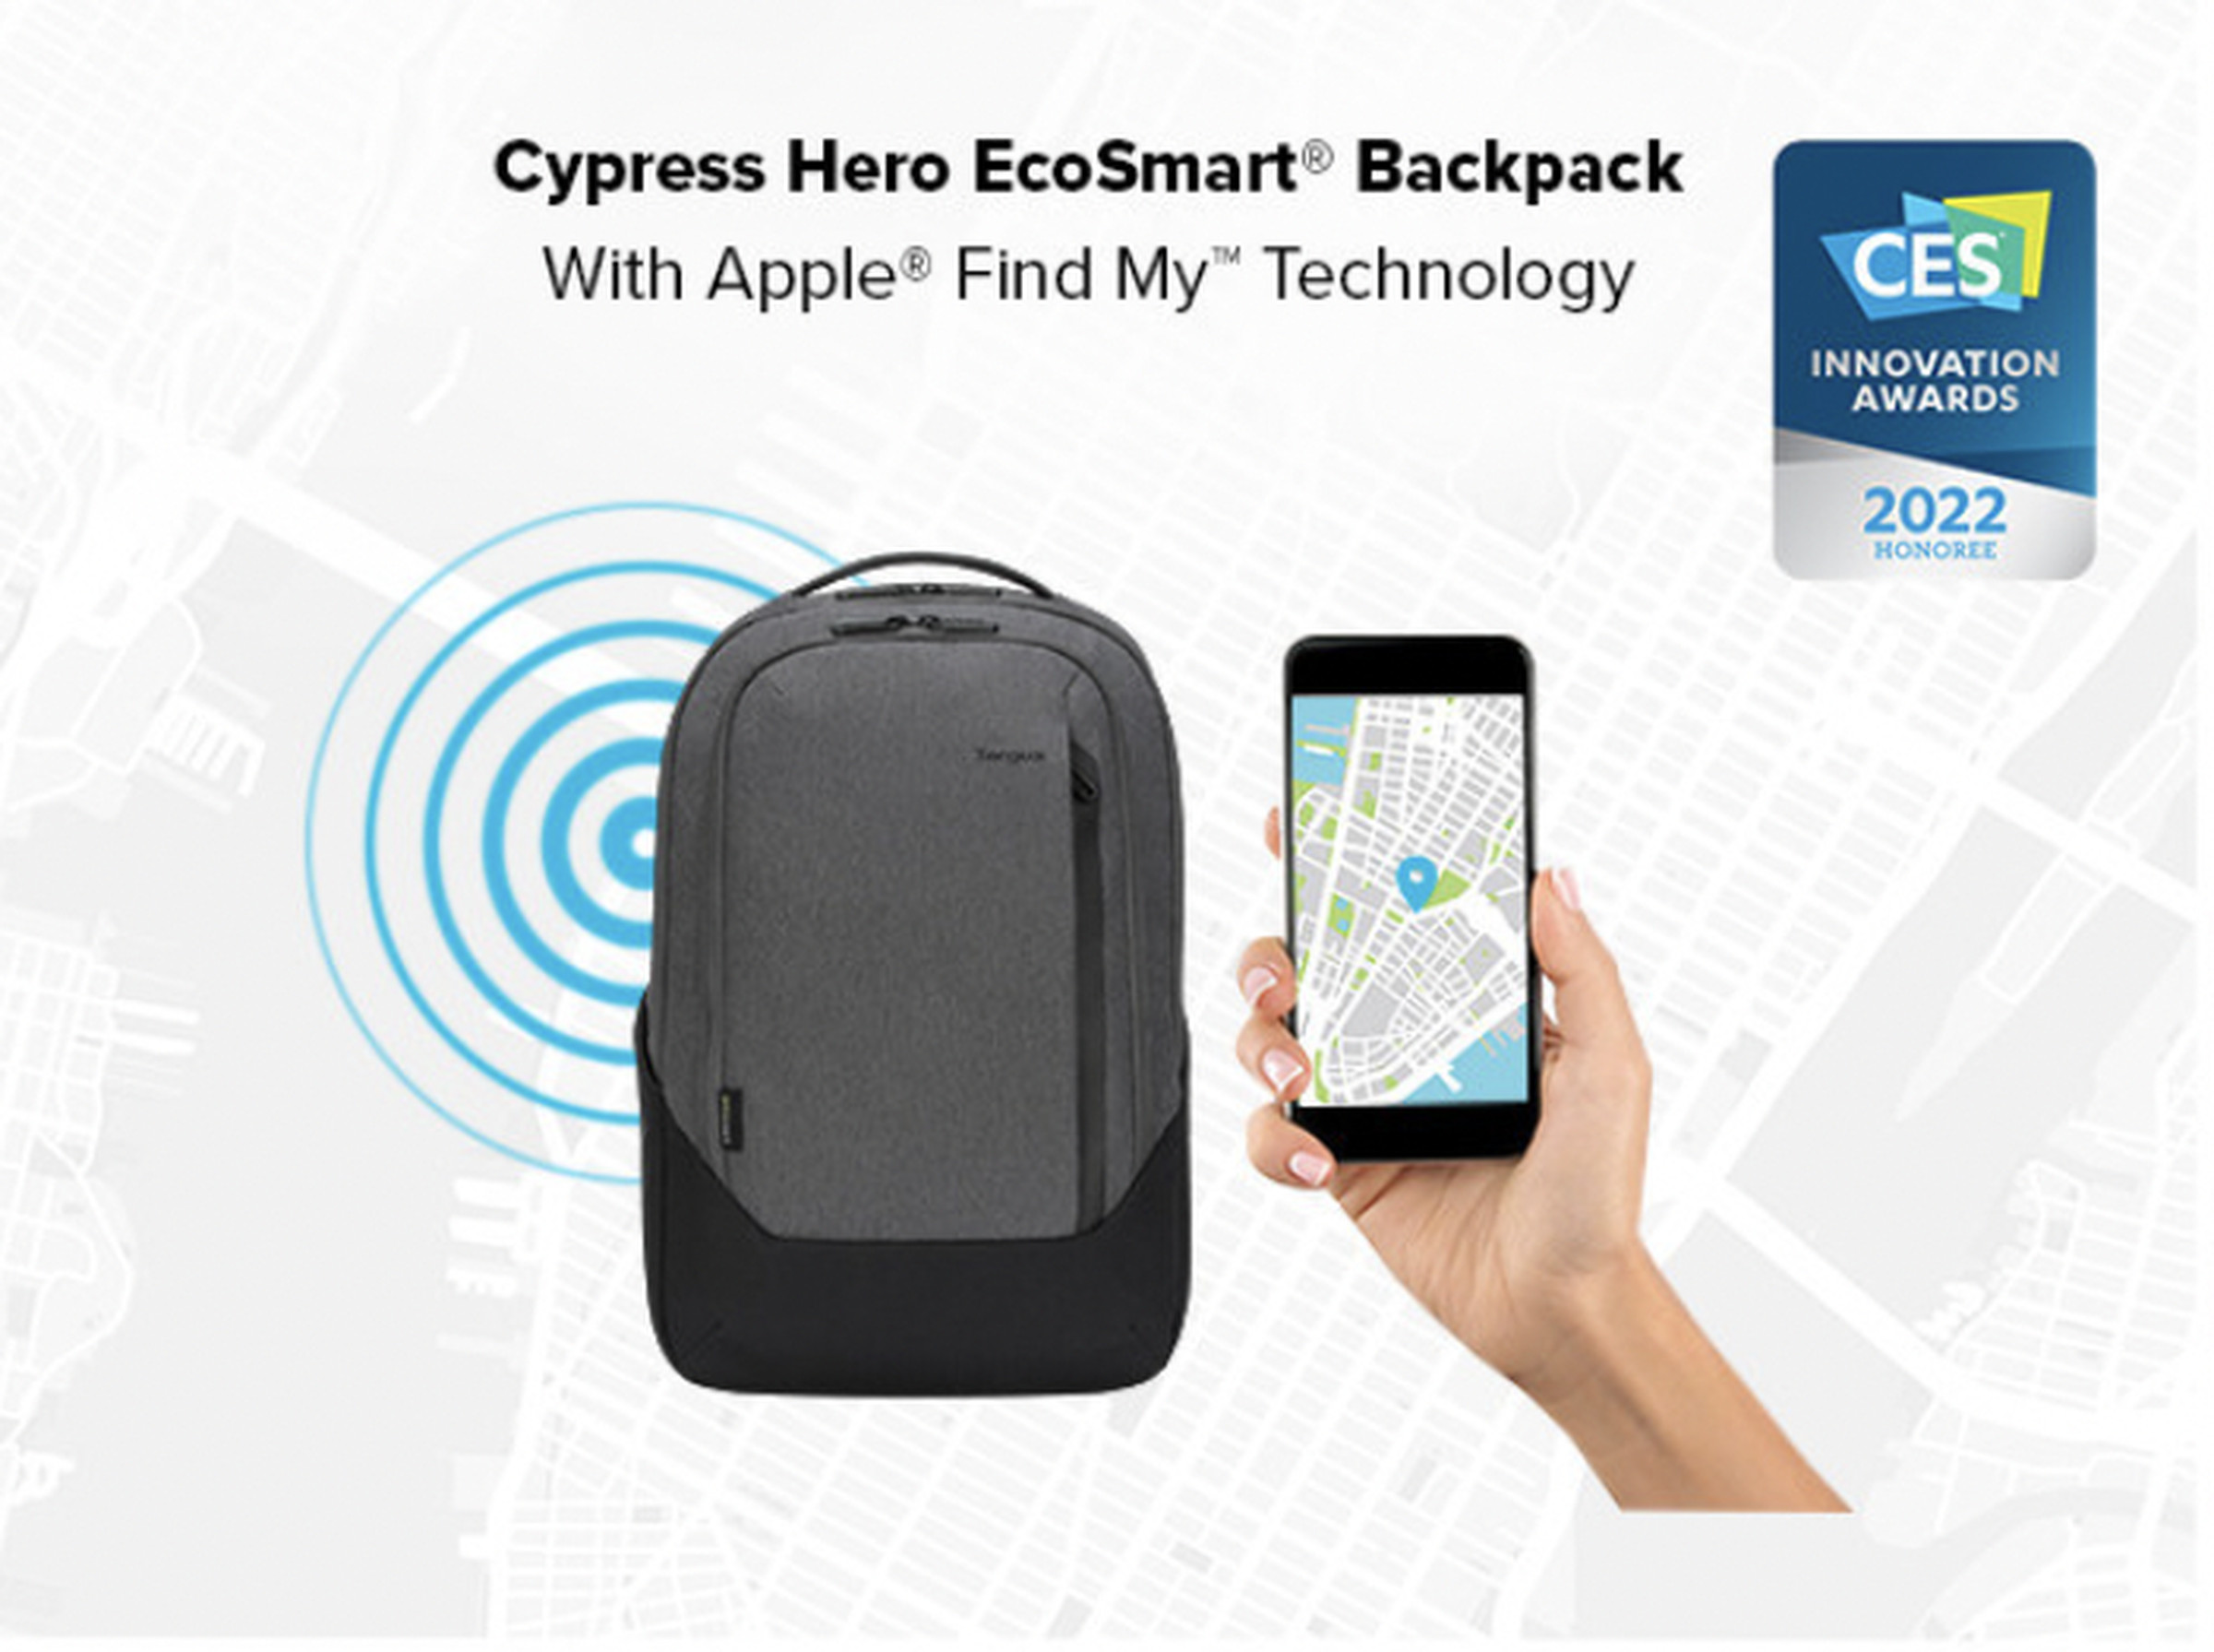 The Cypress Hero EcoSmart backpack includes Apple’s Find My technology.